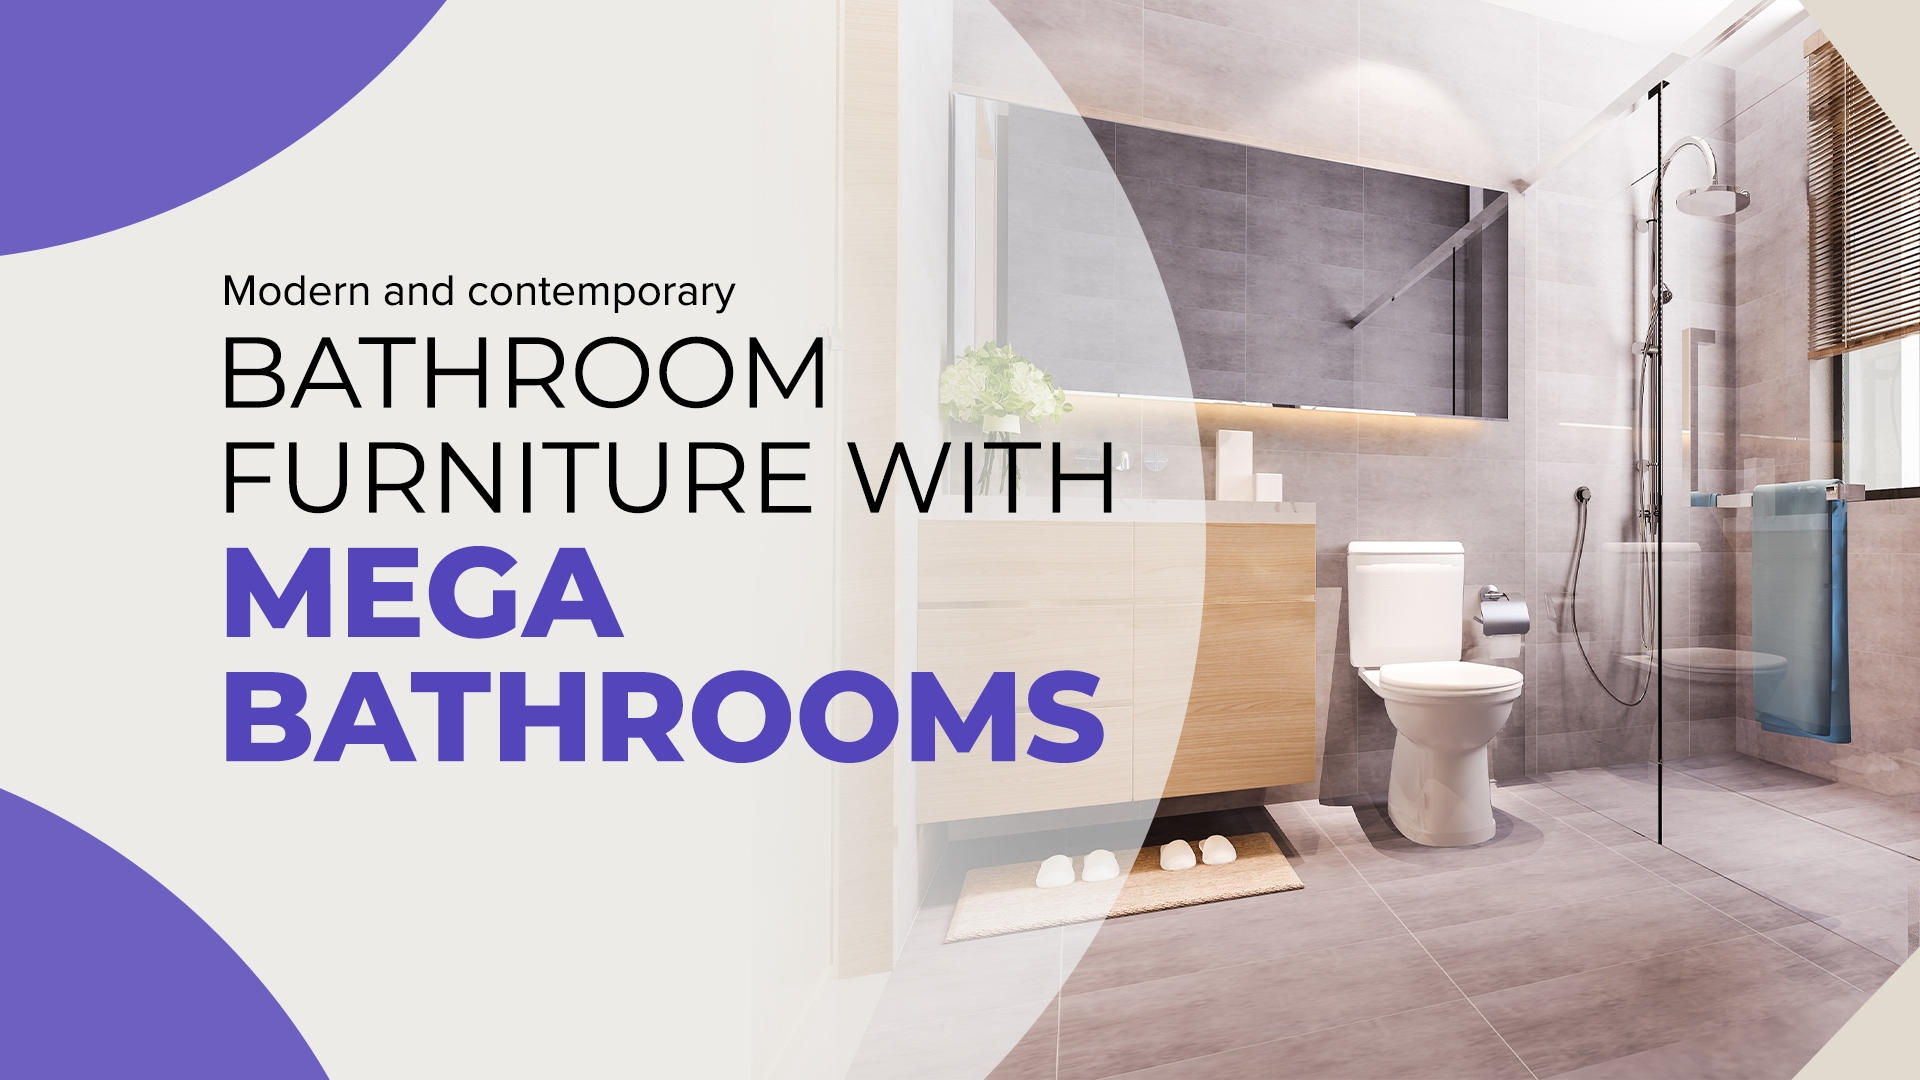 Modern and contemporary bathroom furniture with Mega Bathrooms